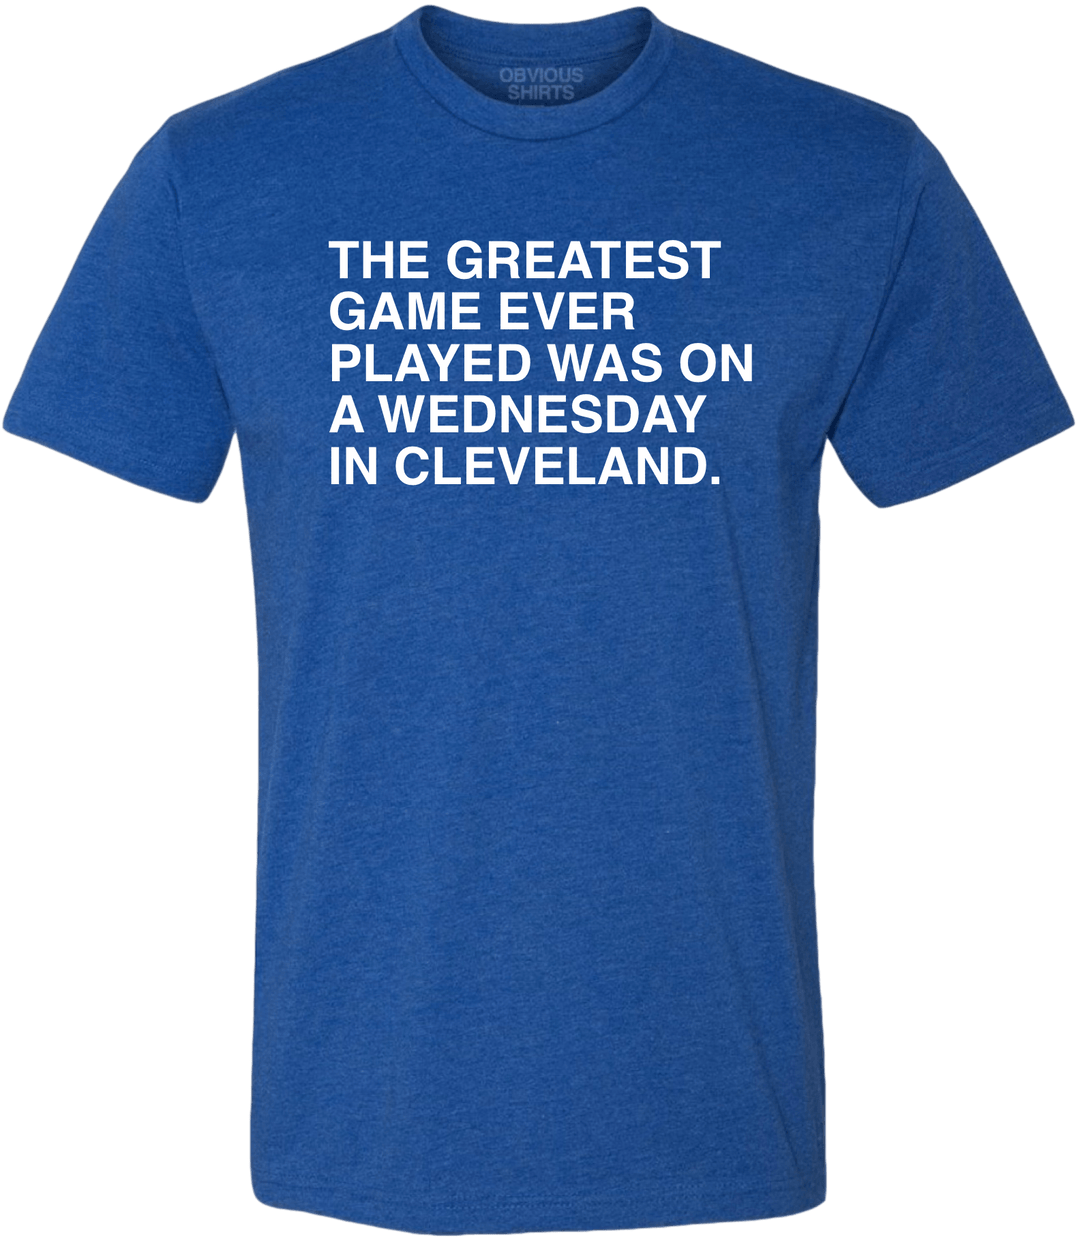 THE GREATEST GAME EVER PLAYED. - OBVIOUS SHIRTS.